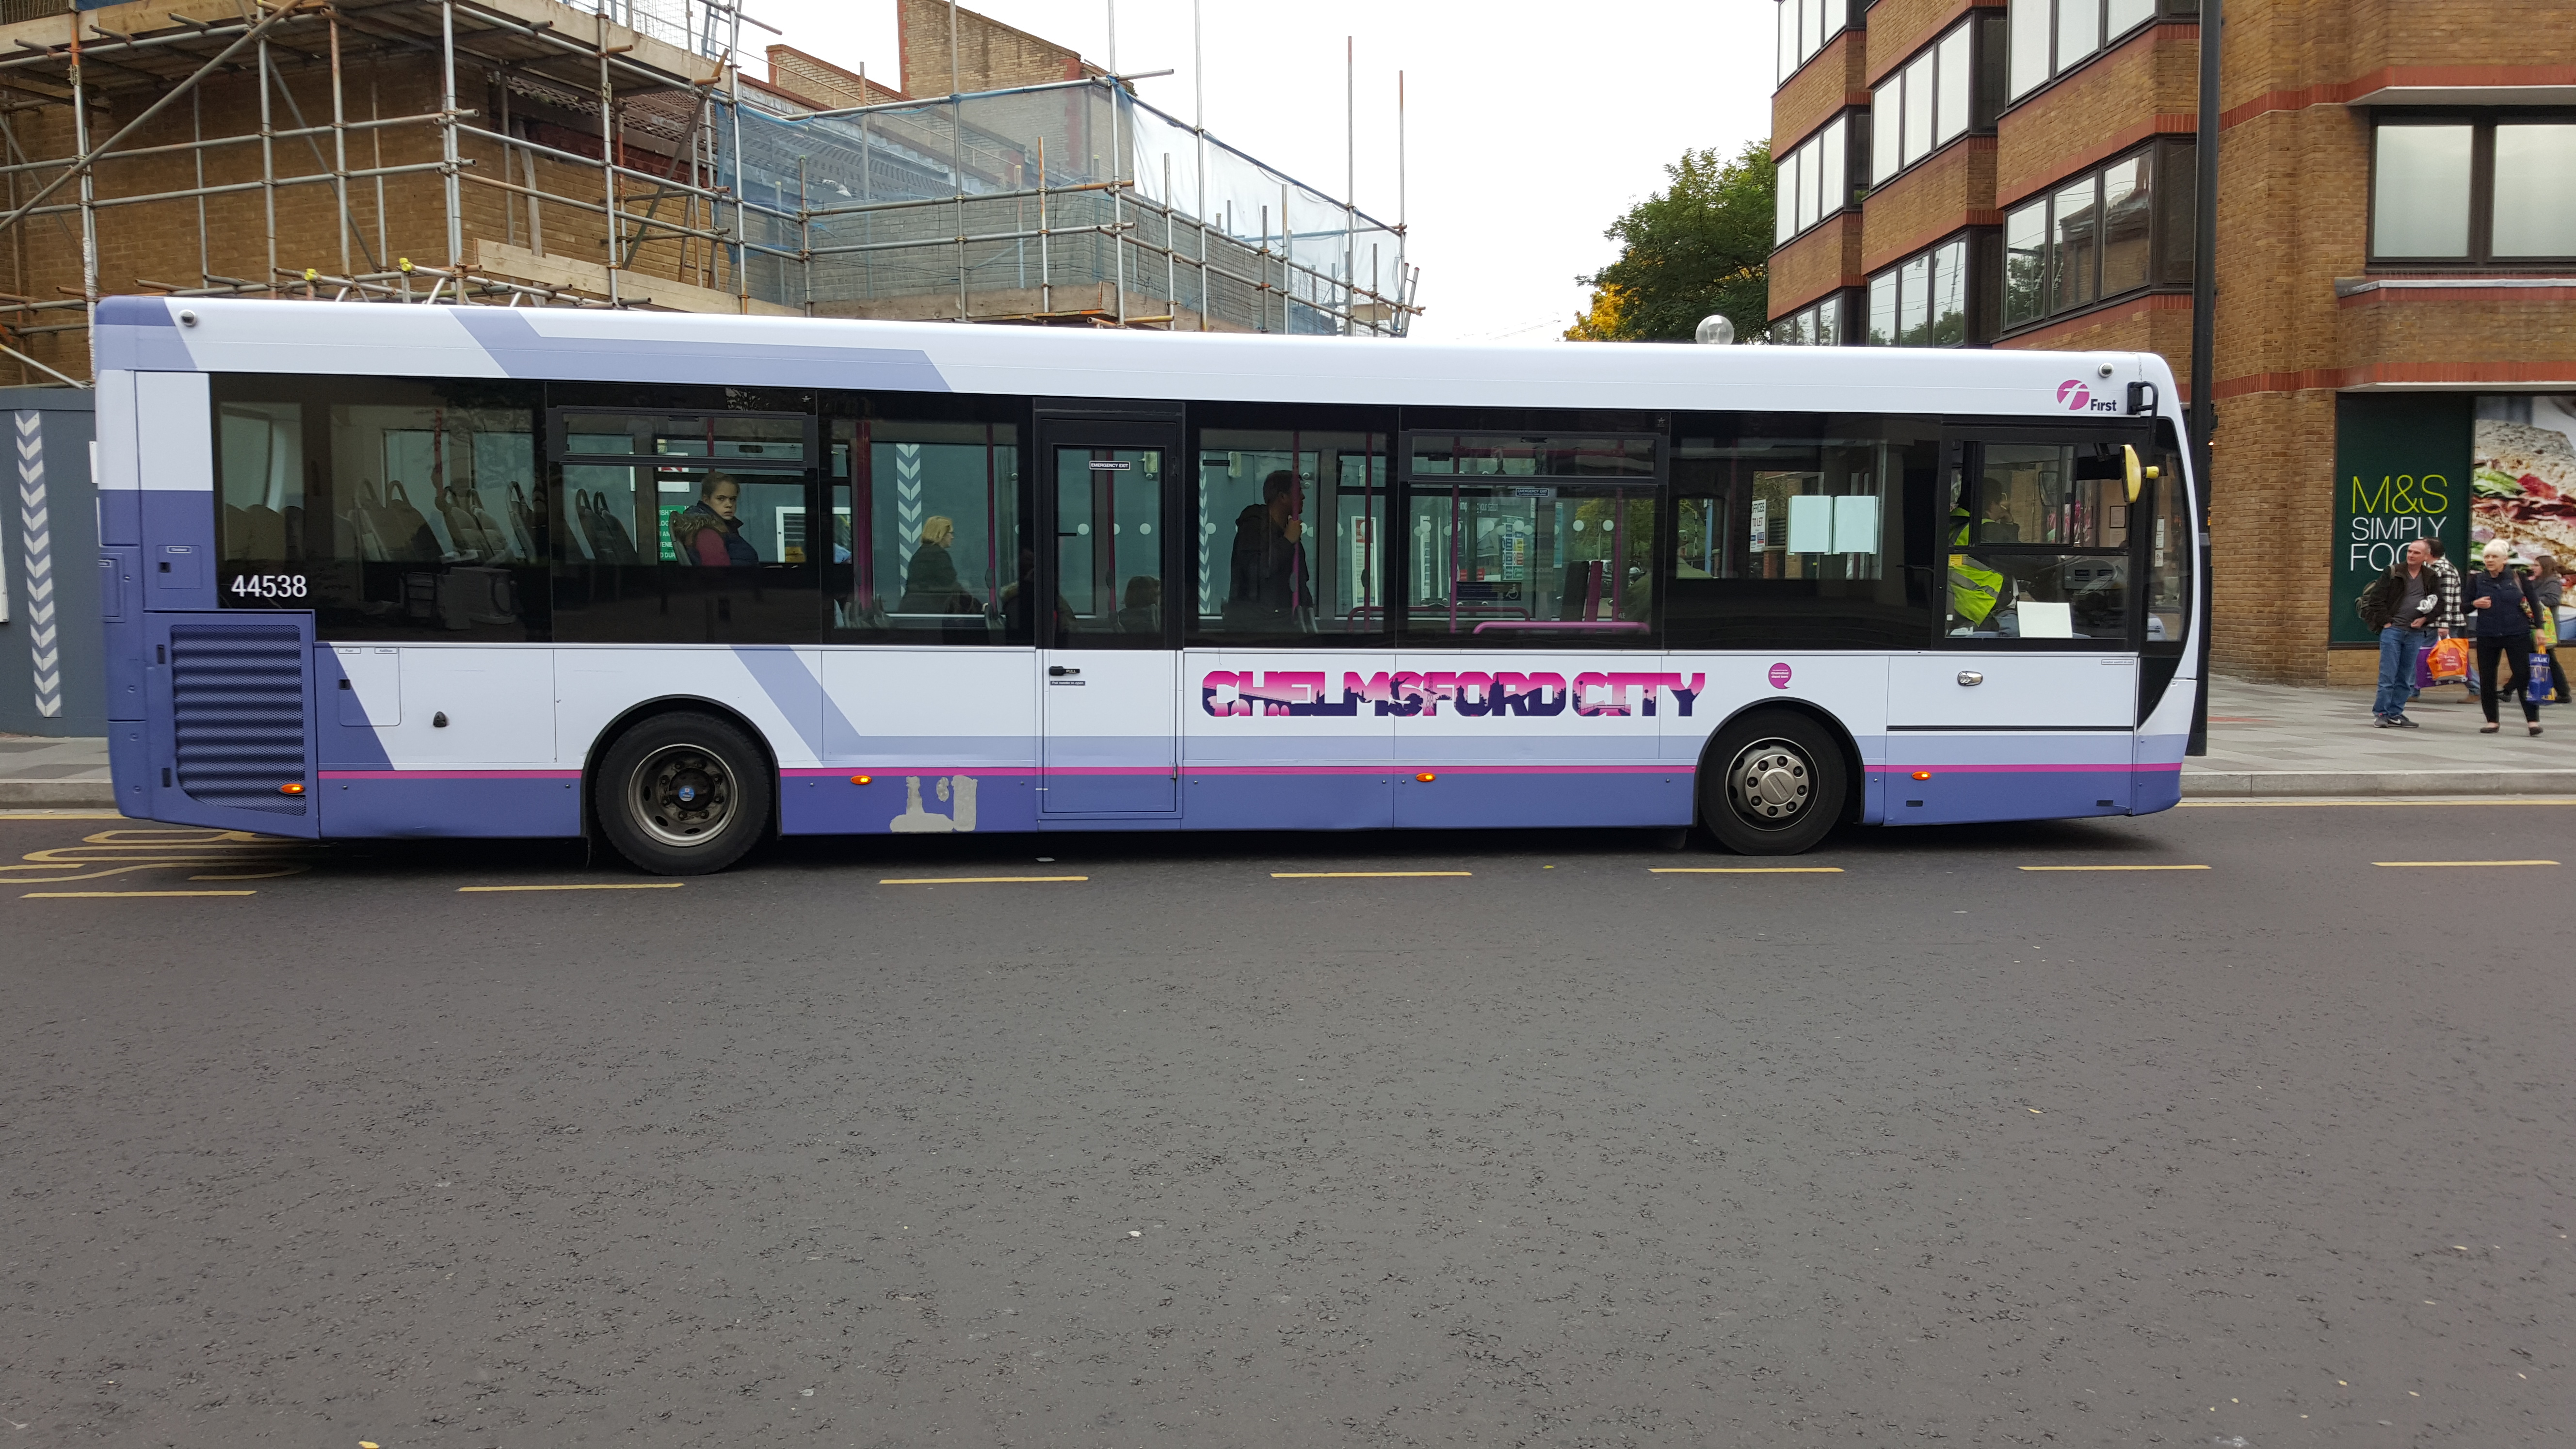 Chelmsford city bus - october 2015 - 2015-10-17 15.11.26 photo